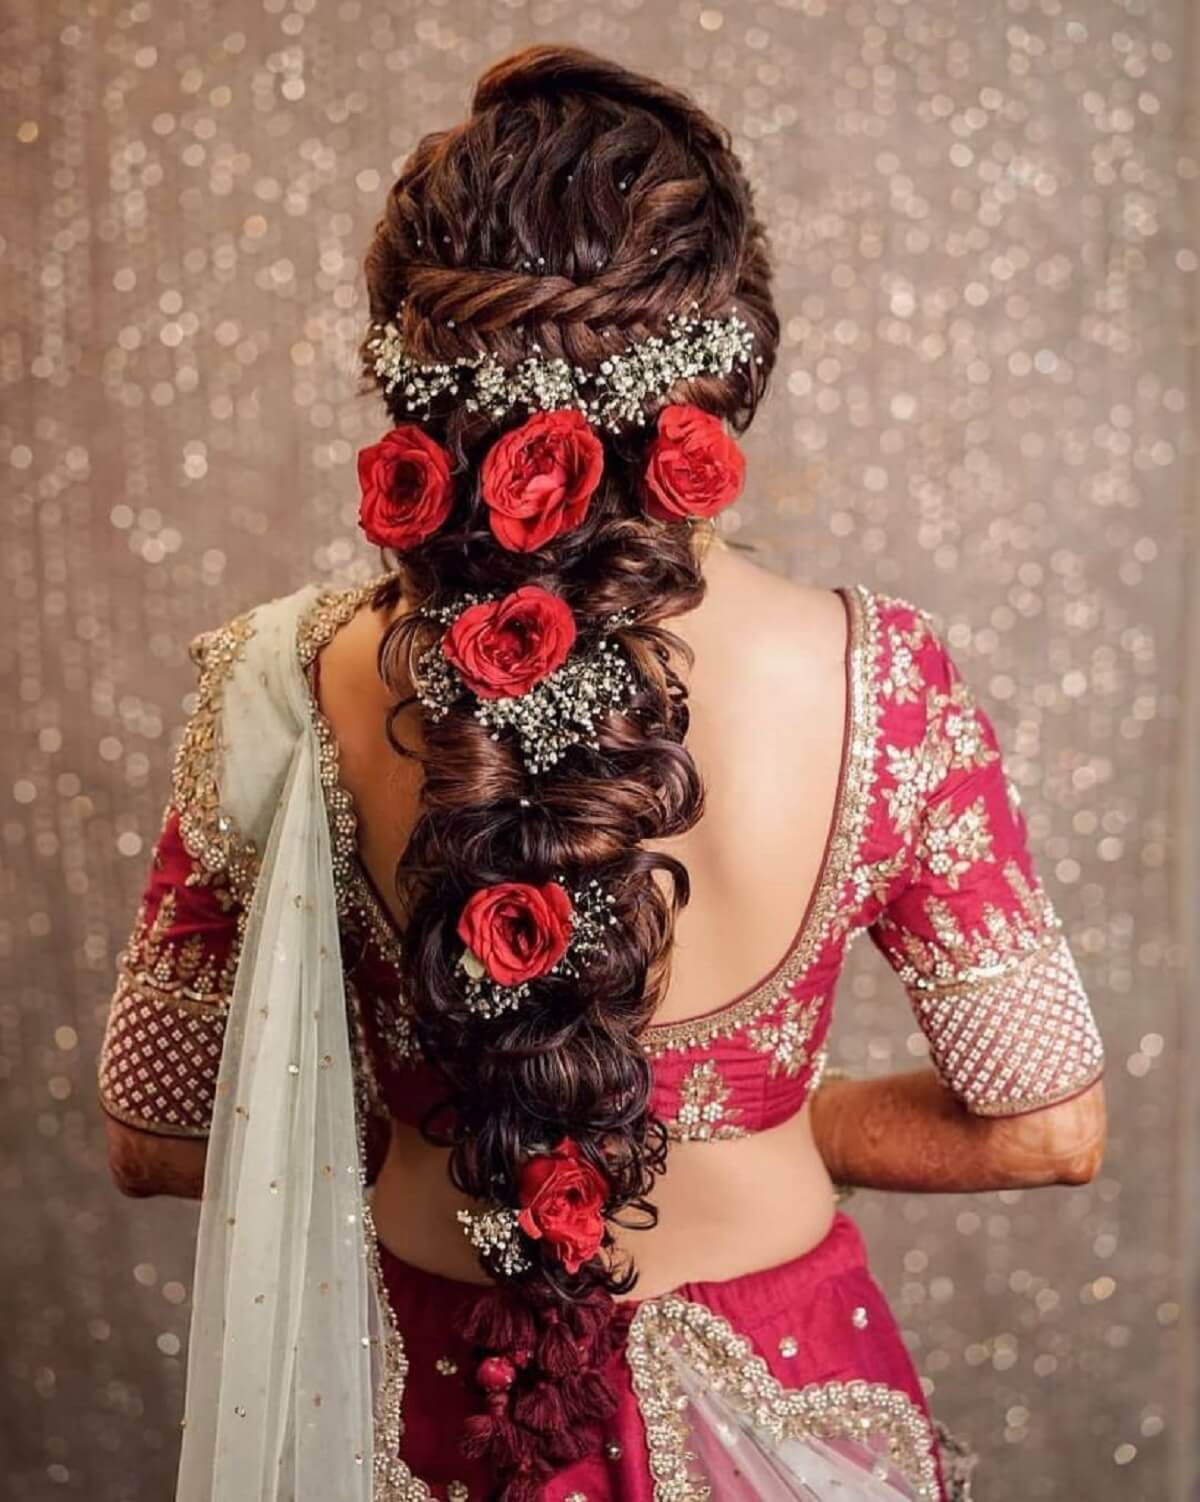 Majestic Floral Bridal Hair Accessories To Make You Look Like A